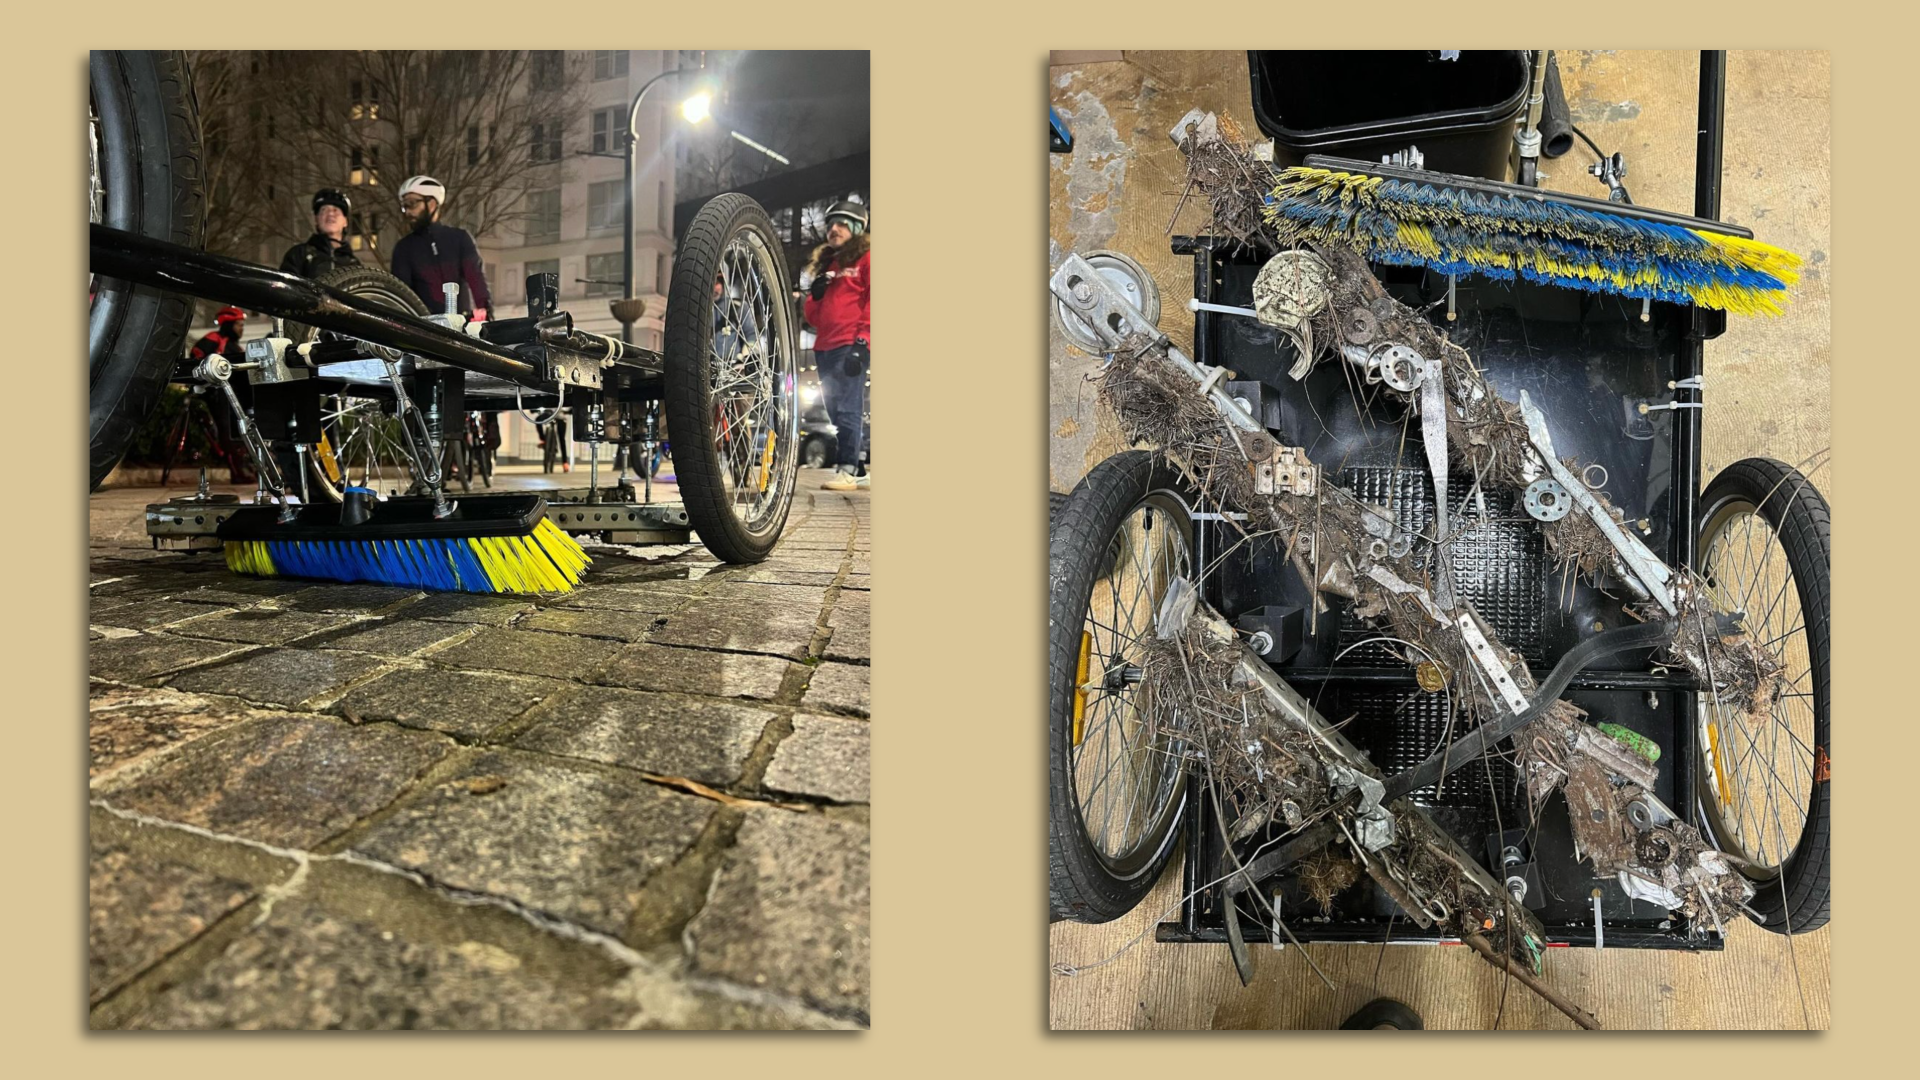 Two photos of a bike trailer with a broom brush and magnets to pick up nails and screws in the road